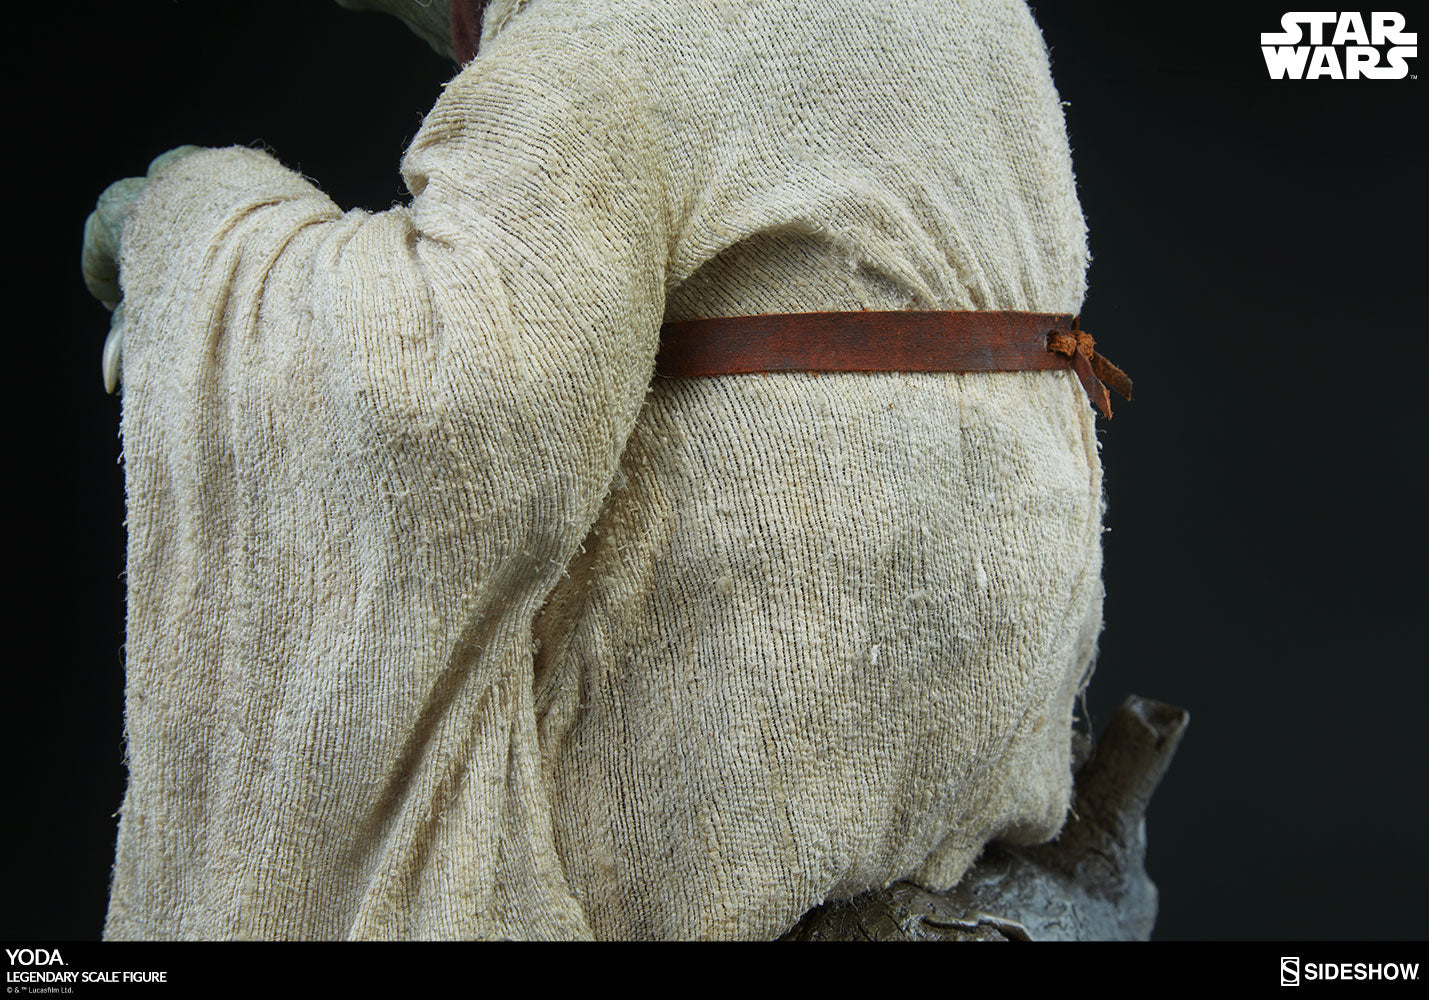 Sideshow Collectibles - Legendary Scale Figure - Star Wars - Yoda